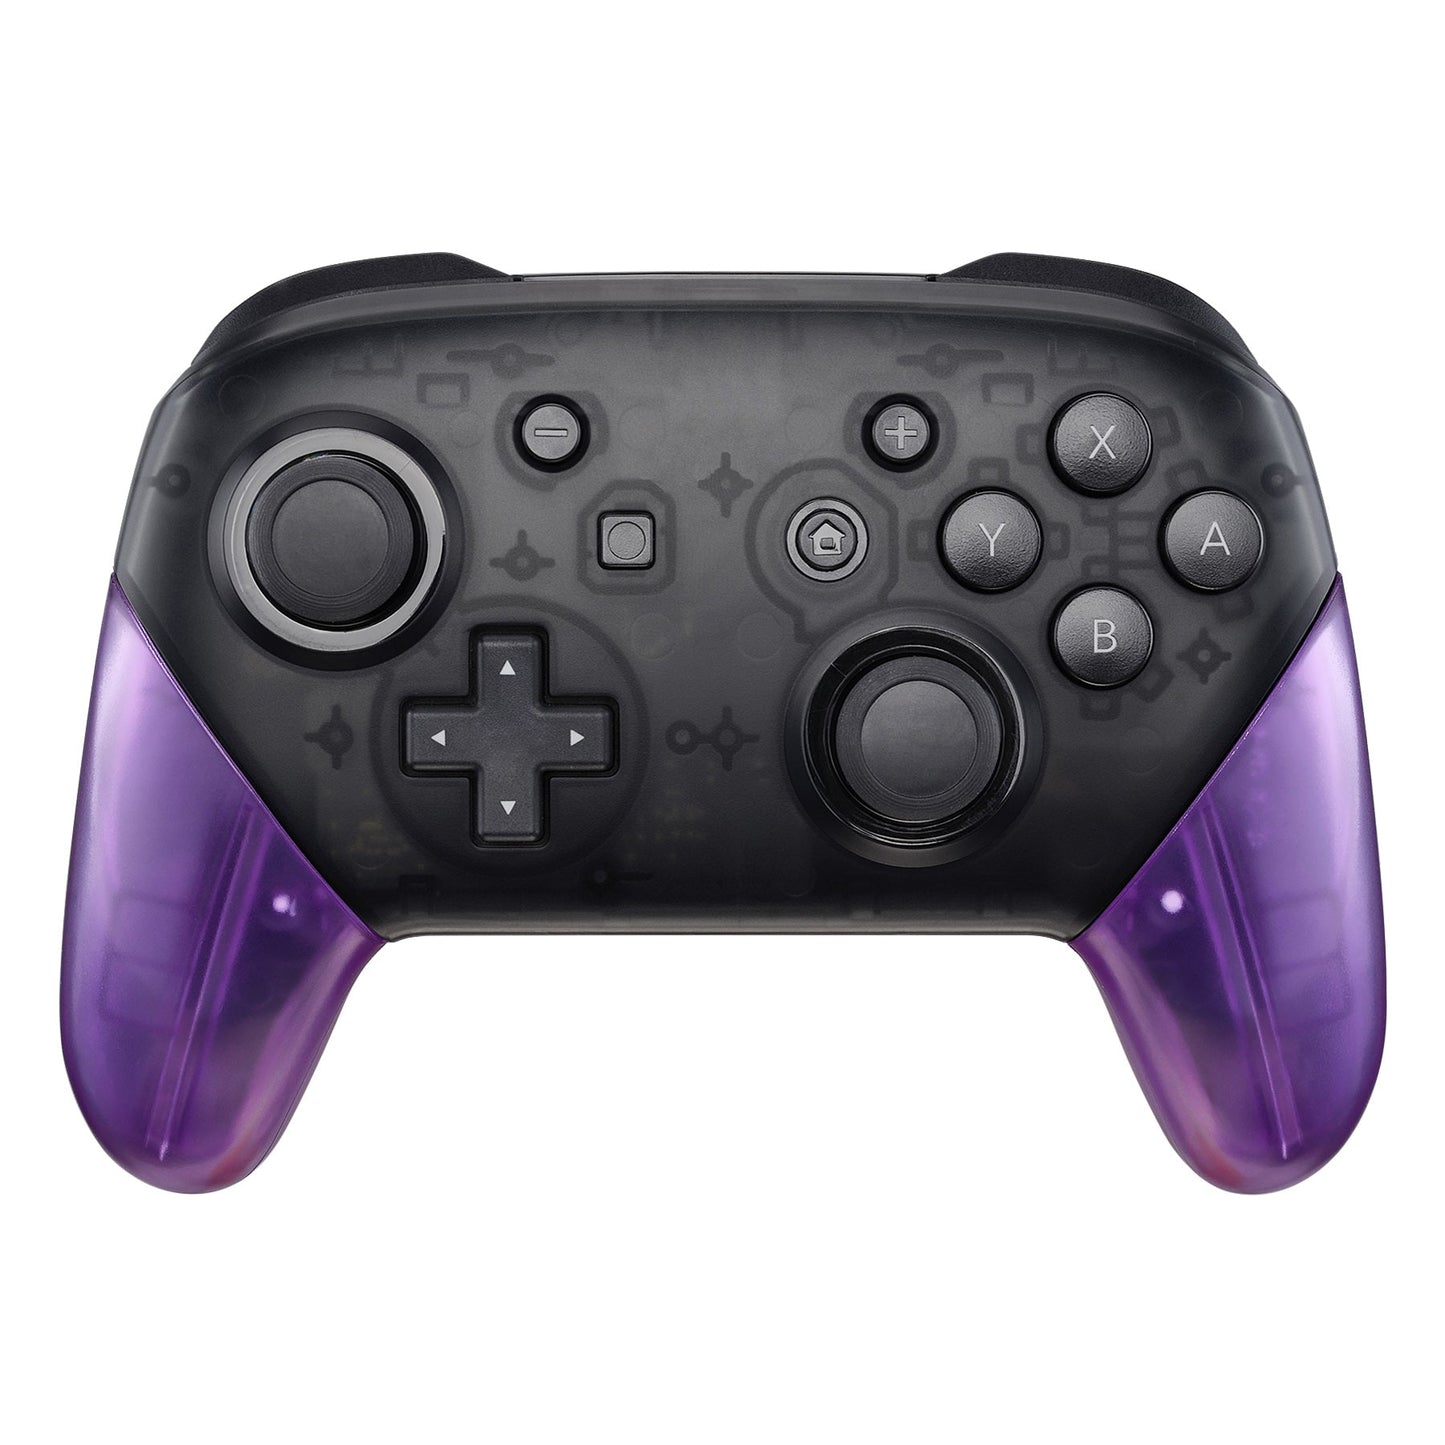 eXtremeRate Retail Clear Atomic Purple Replacement Handle Grips for Nintendo Switch Pro Controller, DIY Hand Grip Shell for Nintendo Switch Pro - Controller NOT Included - GRM505